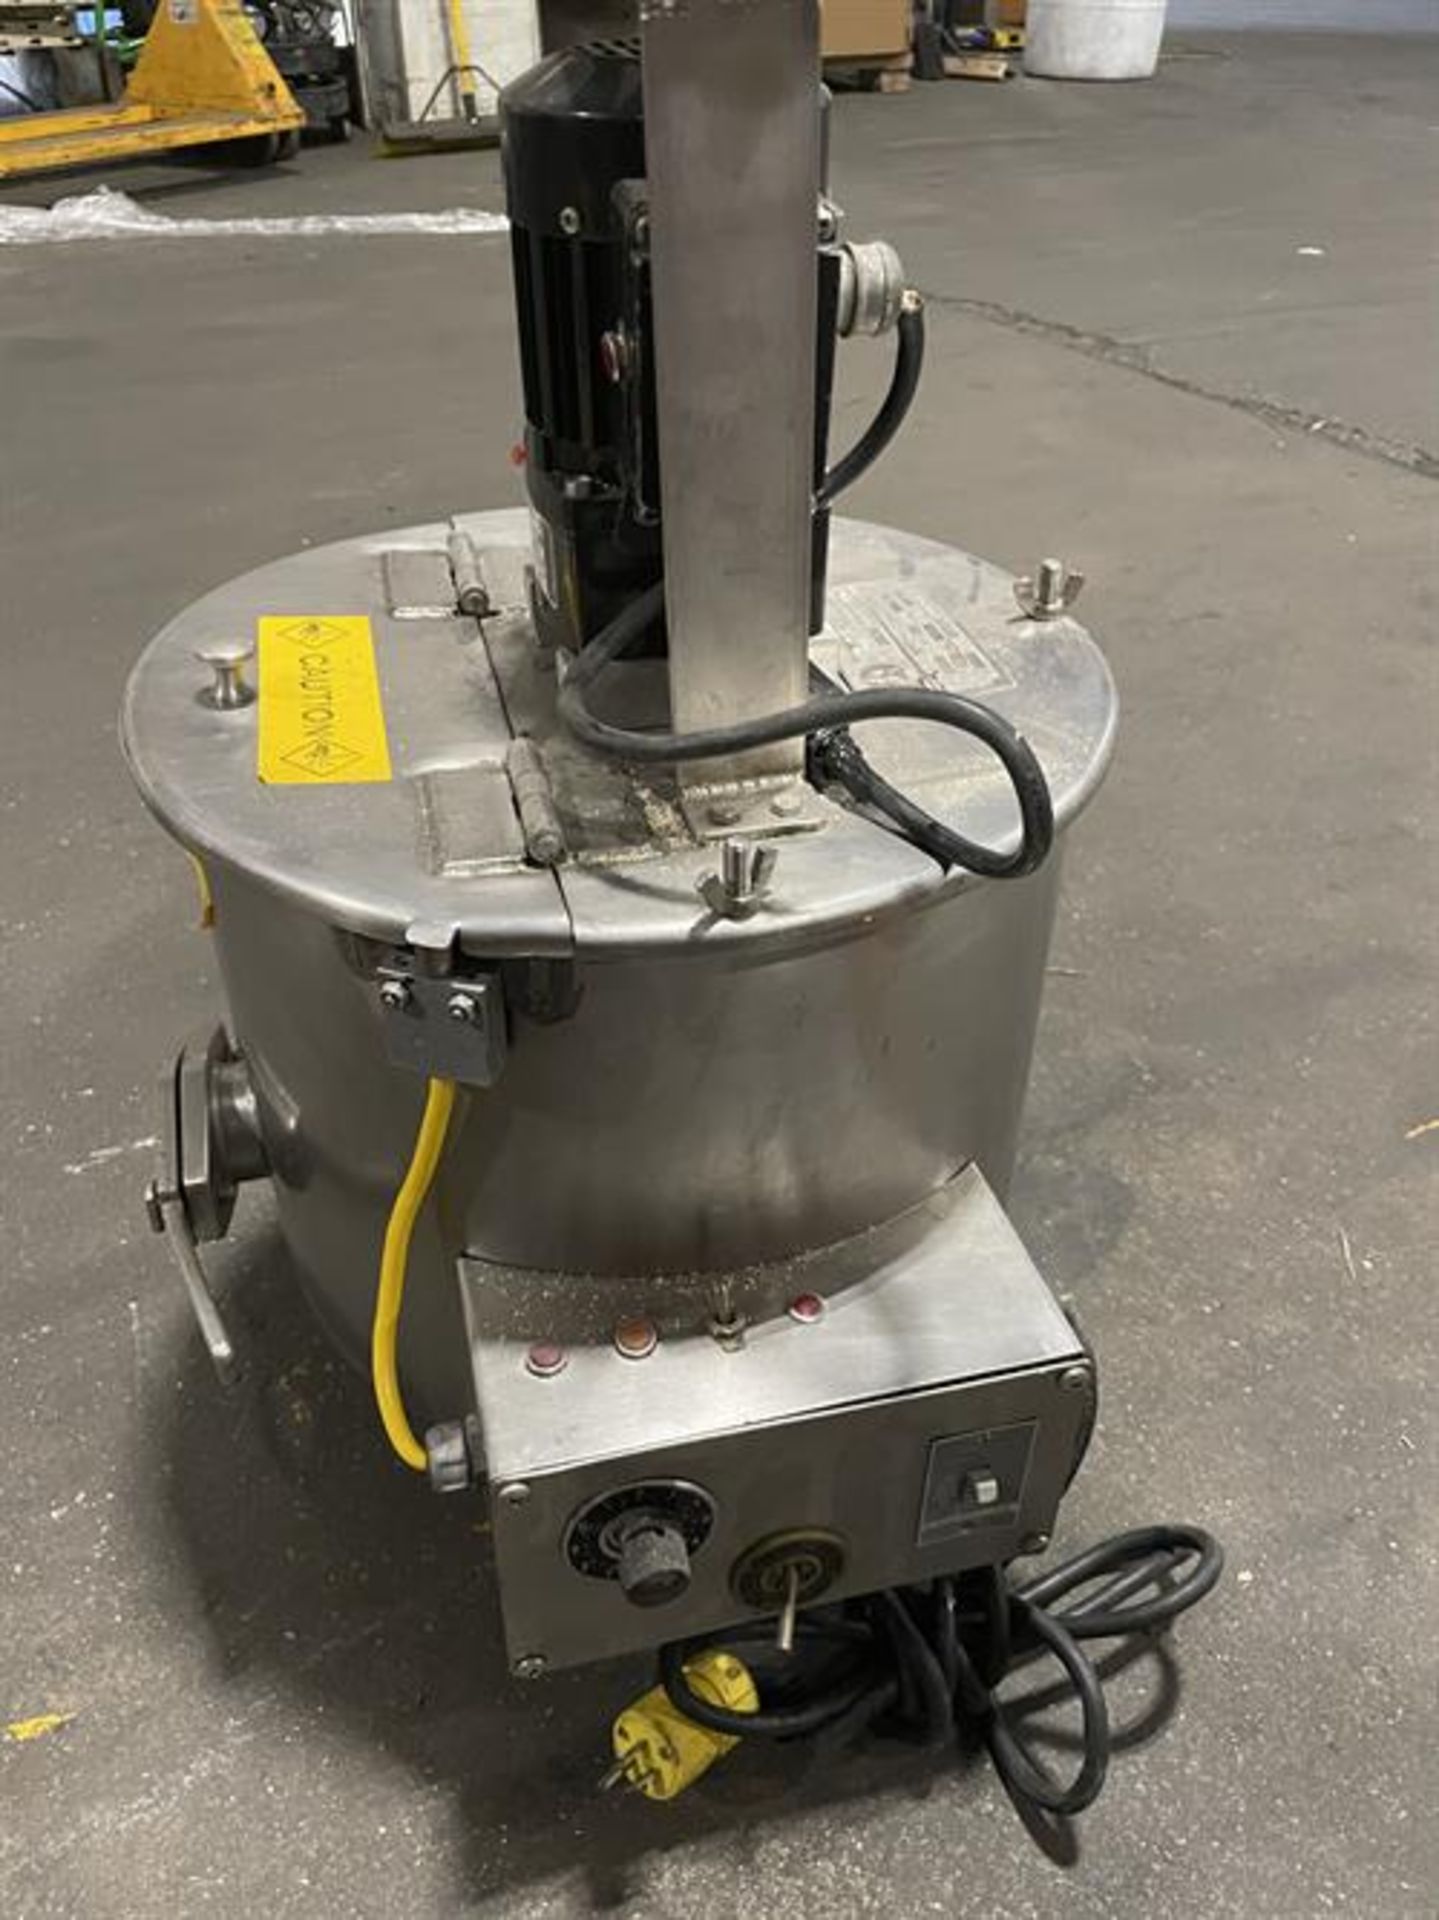 Savage 50-lb SS Chocolate Melter - Model 50 C.M.T. - Serial number 138 - Jacketed and agitated - Image 5 of 7